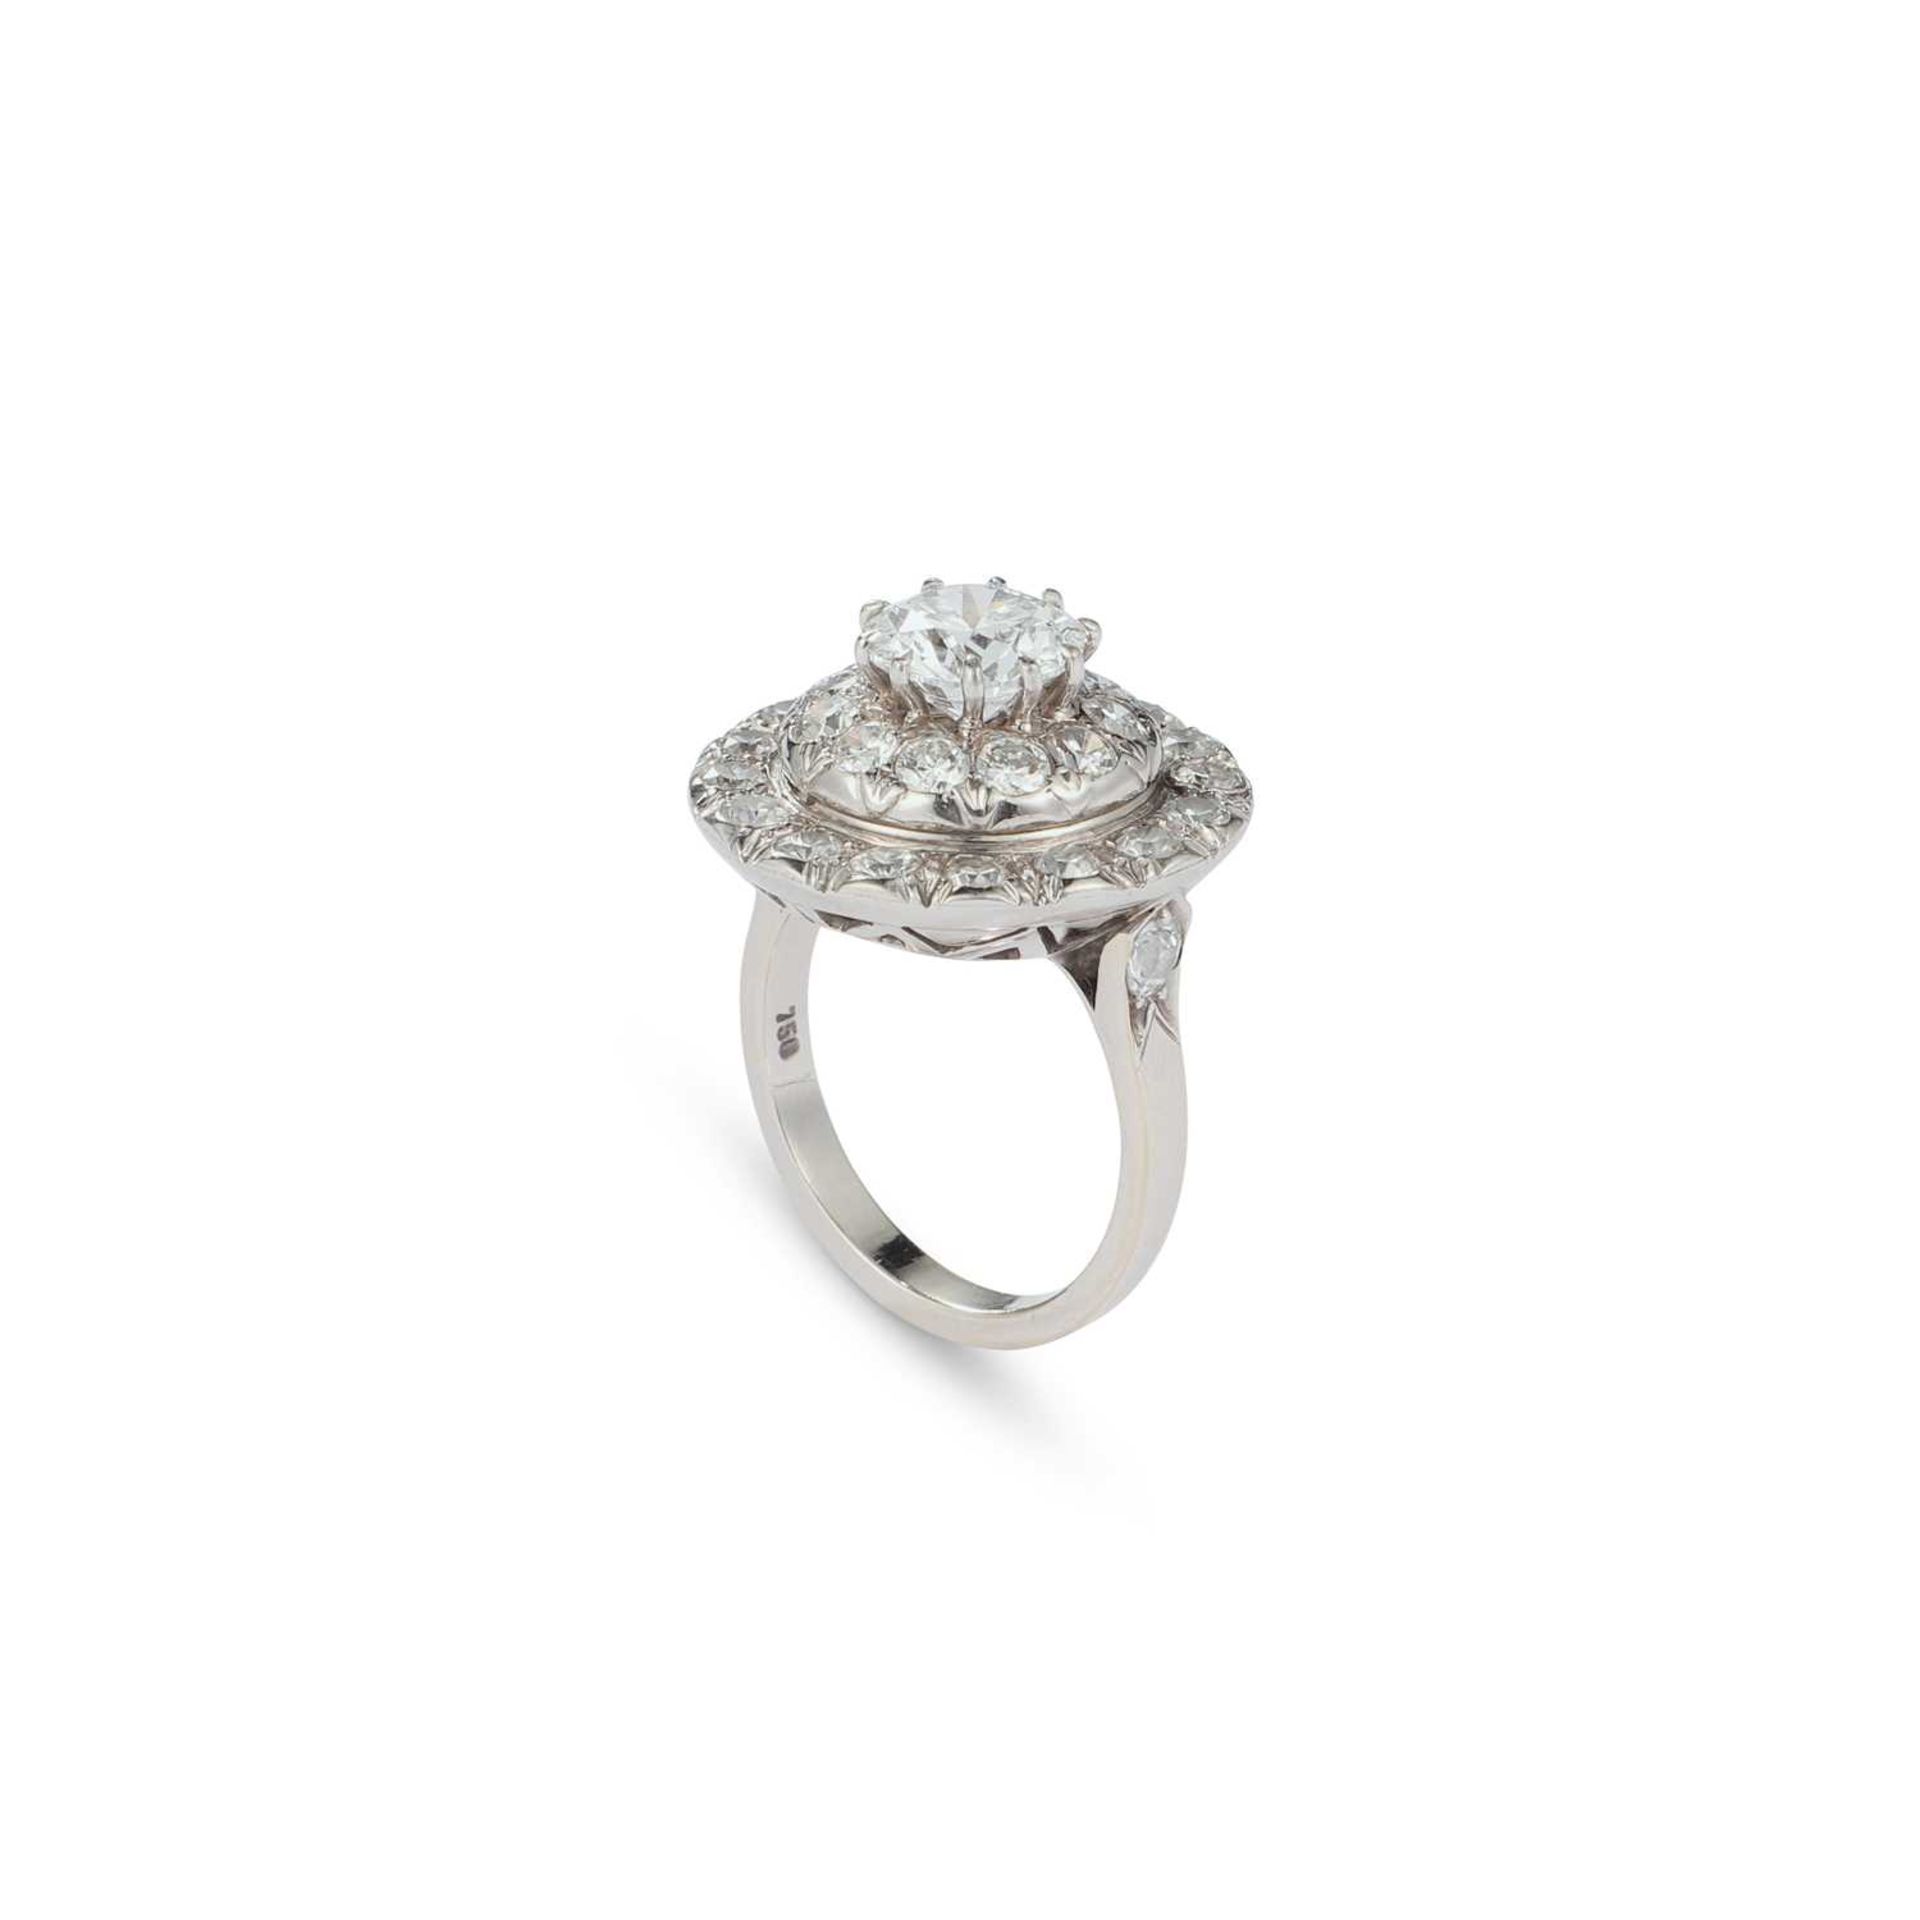 AN 18 CARAT WHITE GOLD AND DIAMOND TARGET RING - Image 2 of 2